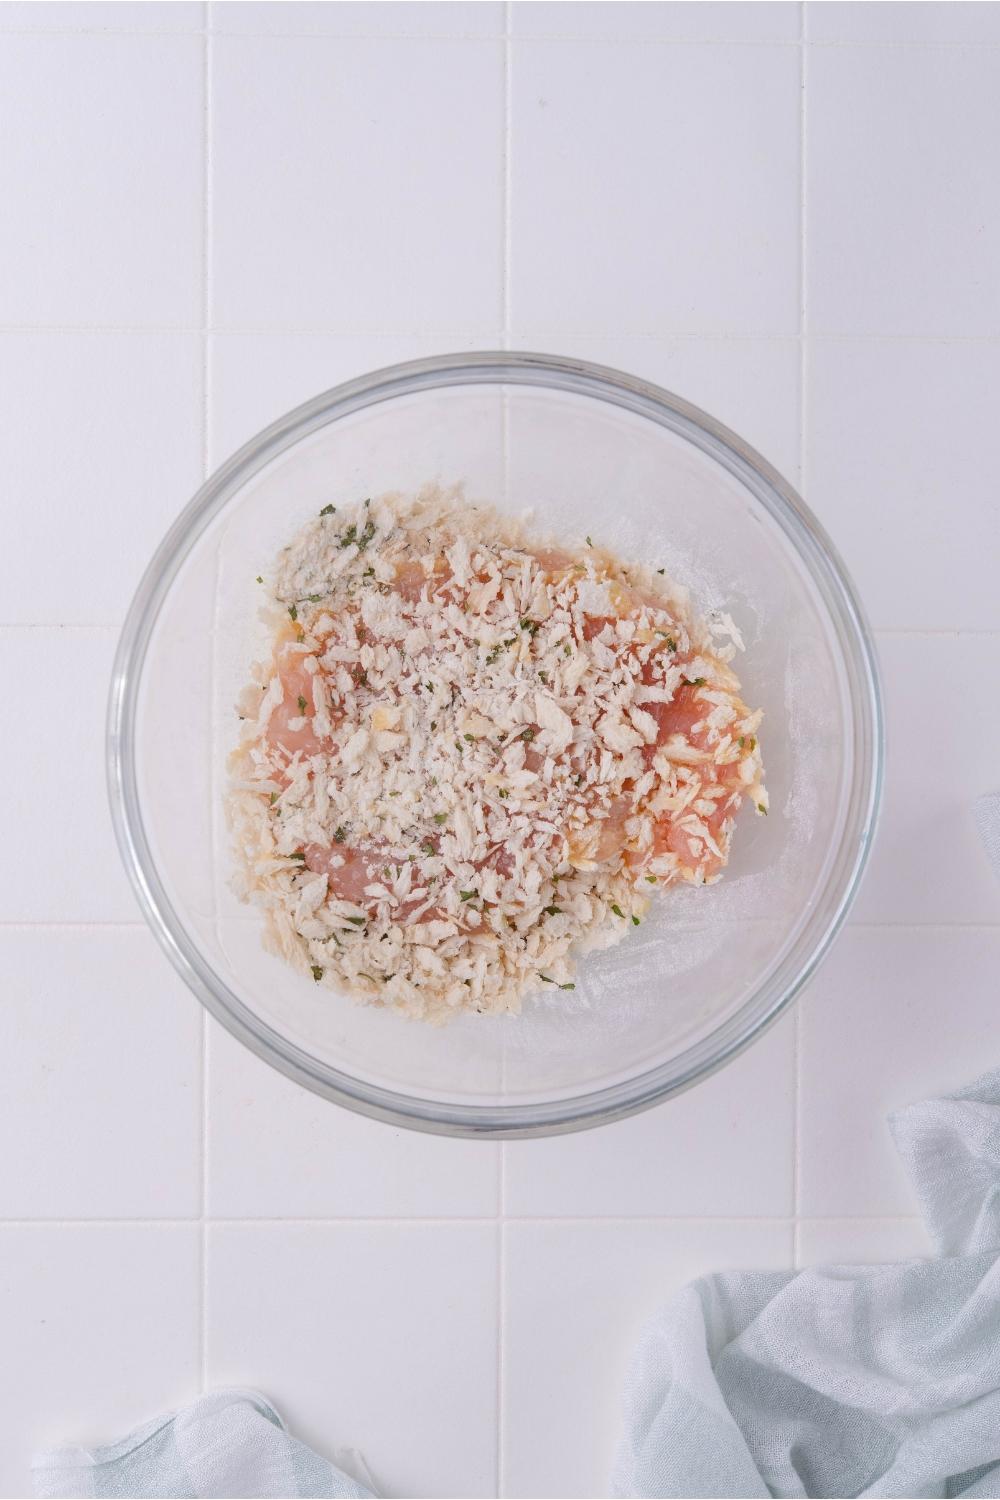 Clear bowl with raw chicken coated in a bread crumb mixture.